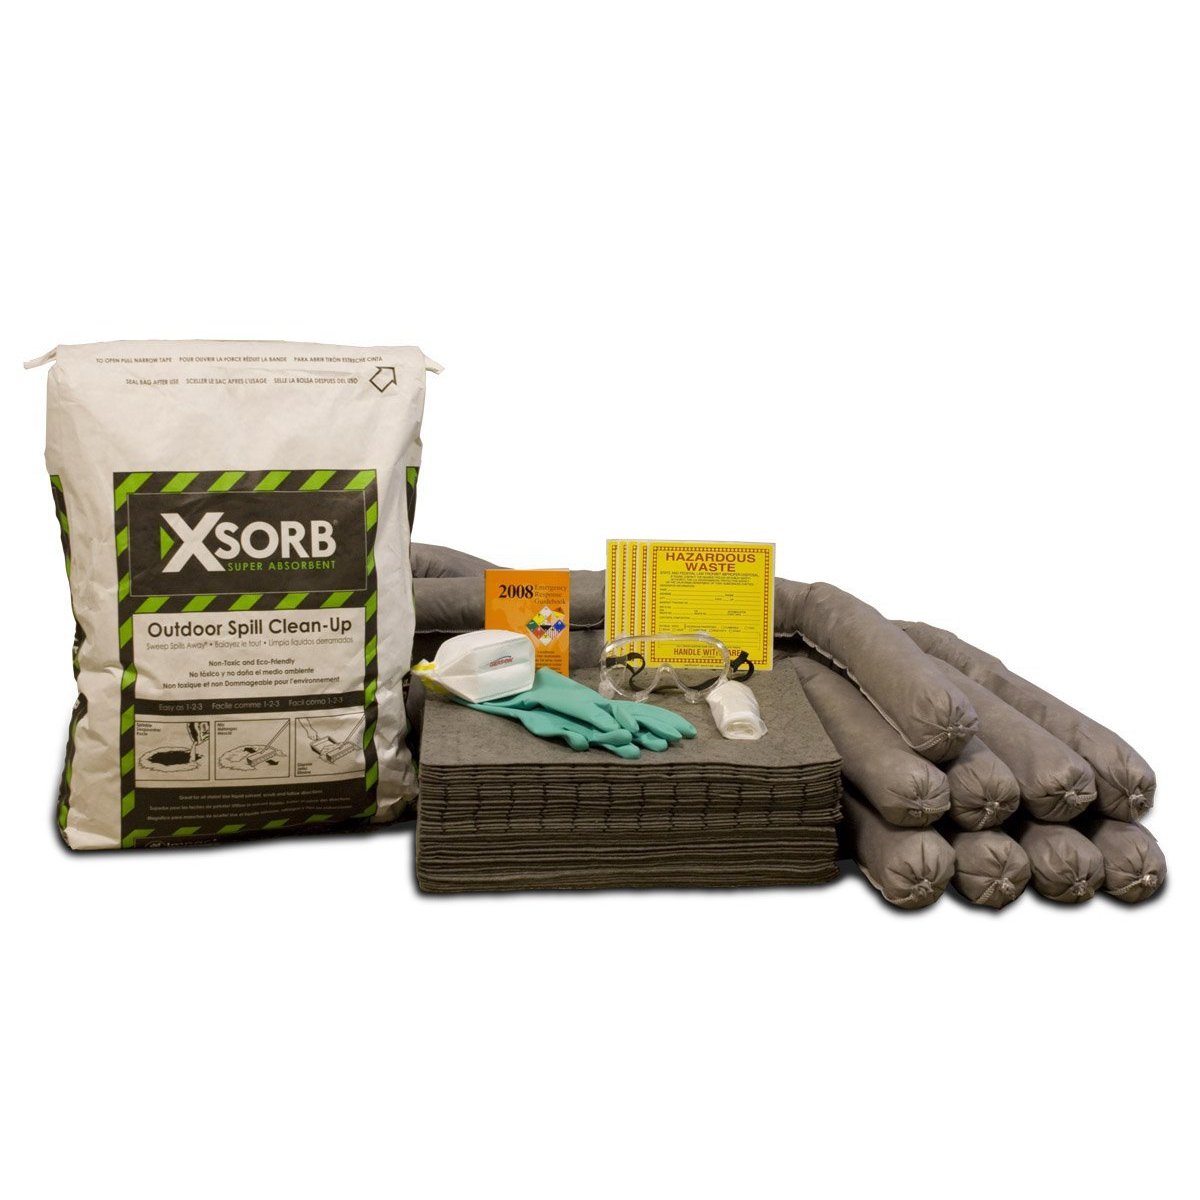 XSORB Outdoor All-Purpose 30 gal Labpack Spill Kit - 1 DRUM-eSafety Supplies, Inc